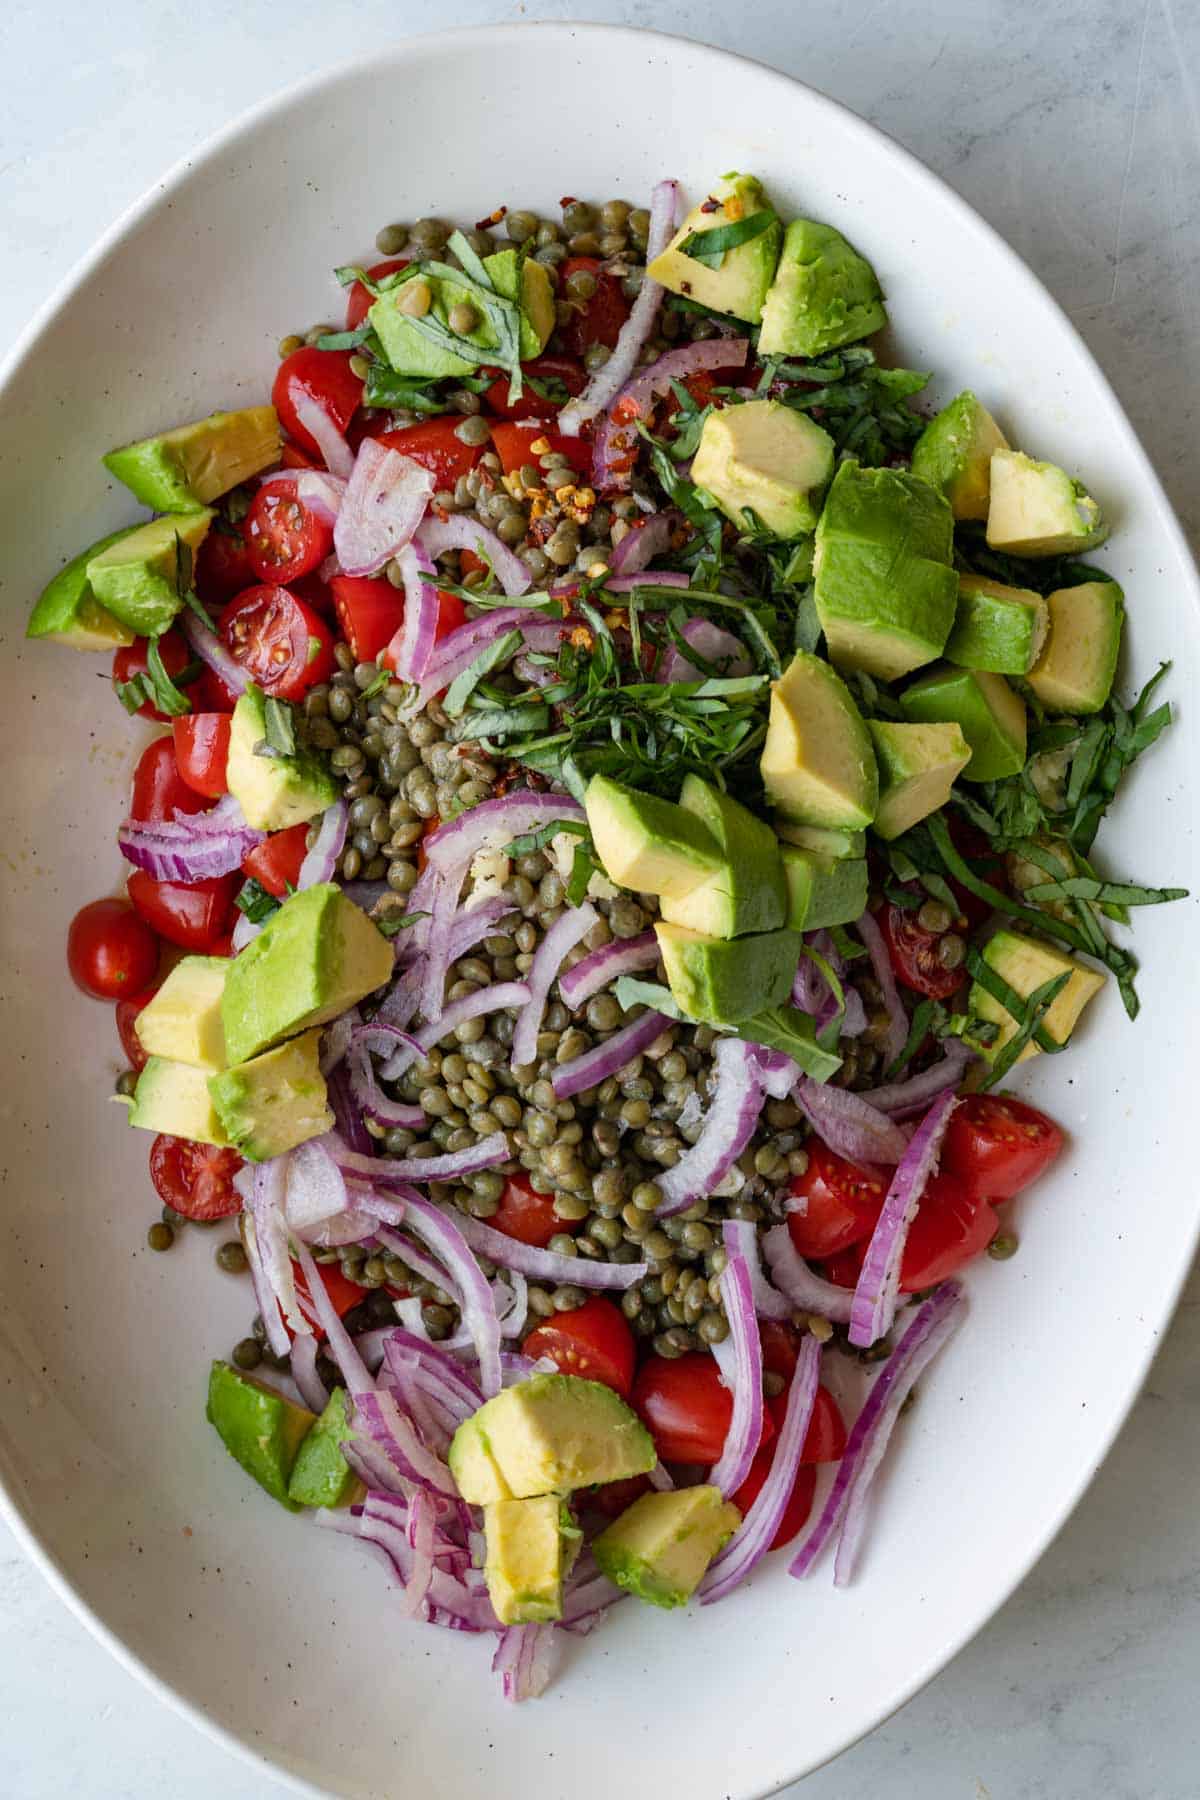 Tomatoes, avocado, legumes, red onion, and chopped basil in a white oval dish.